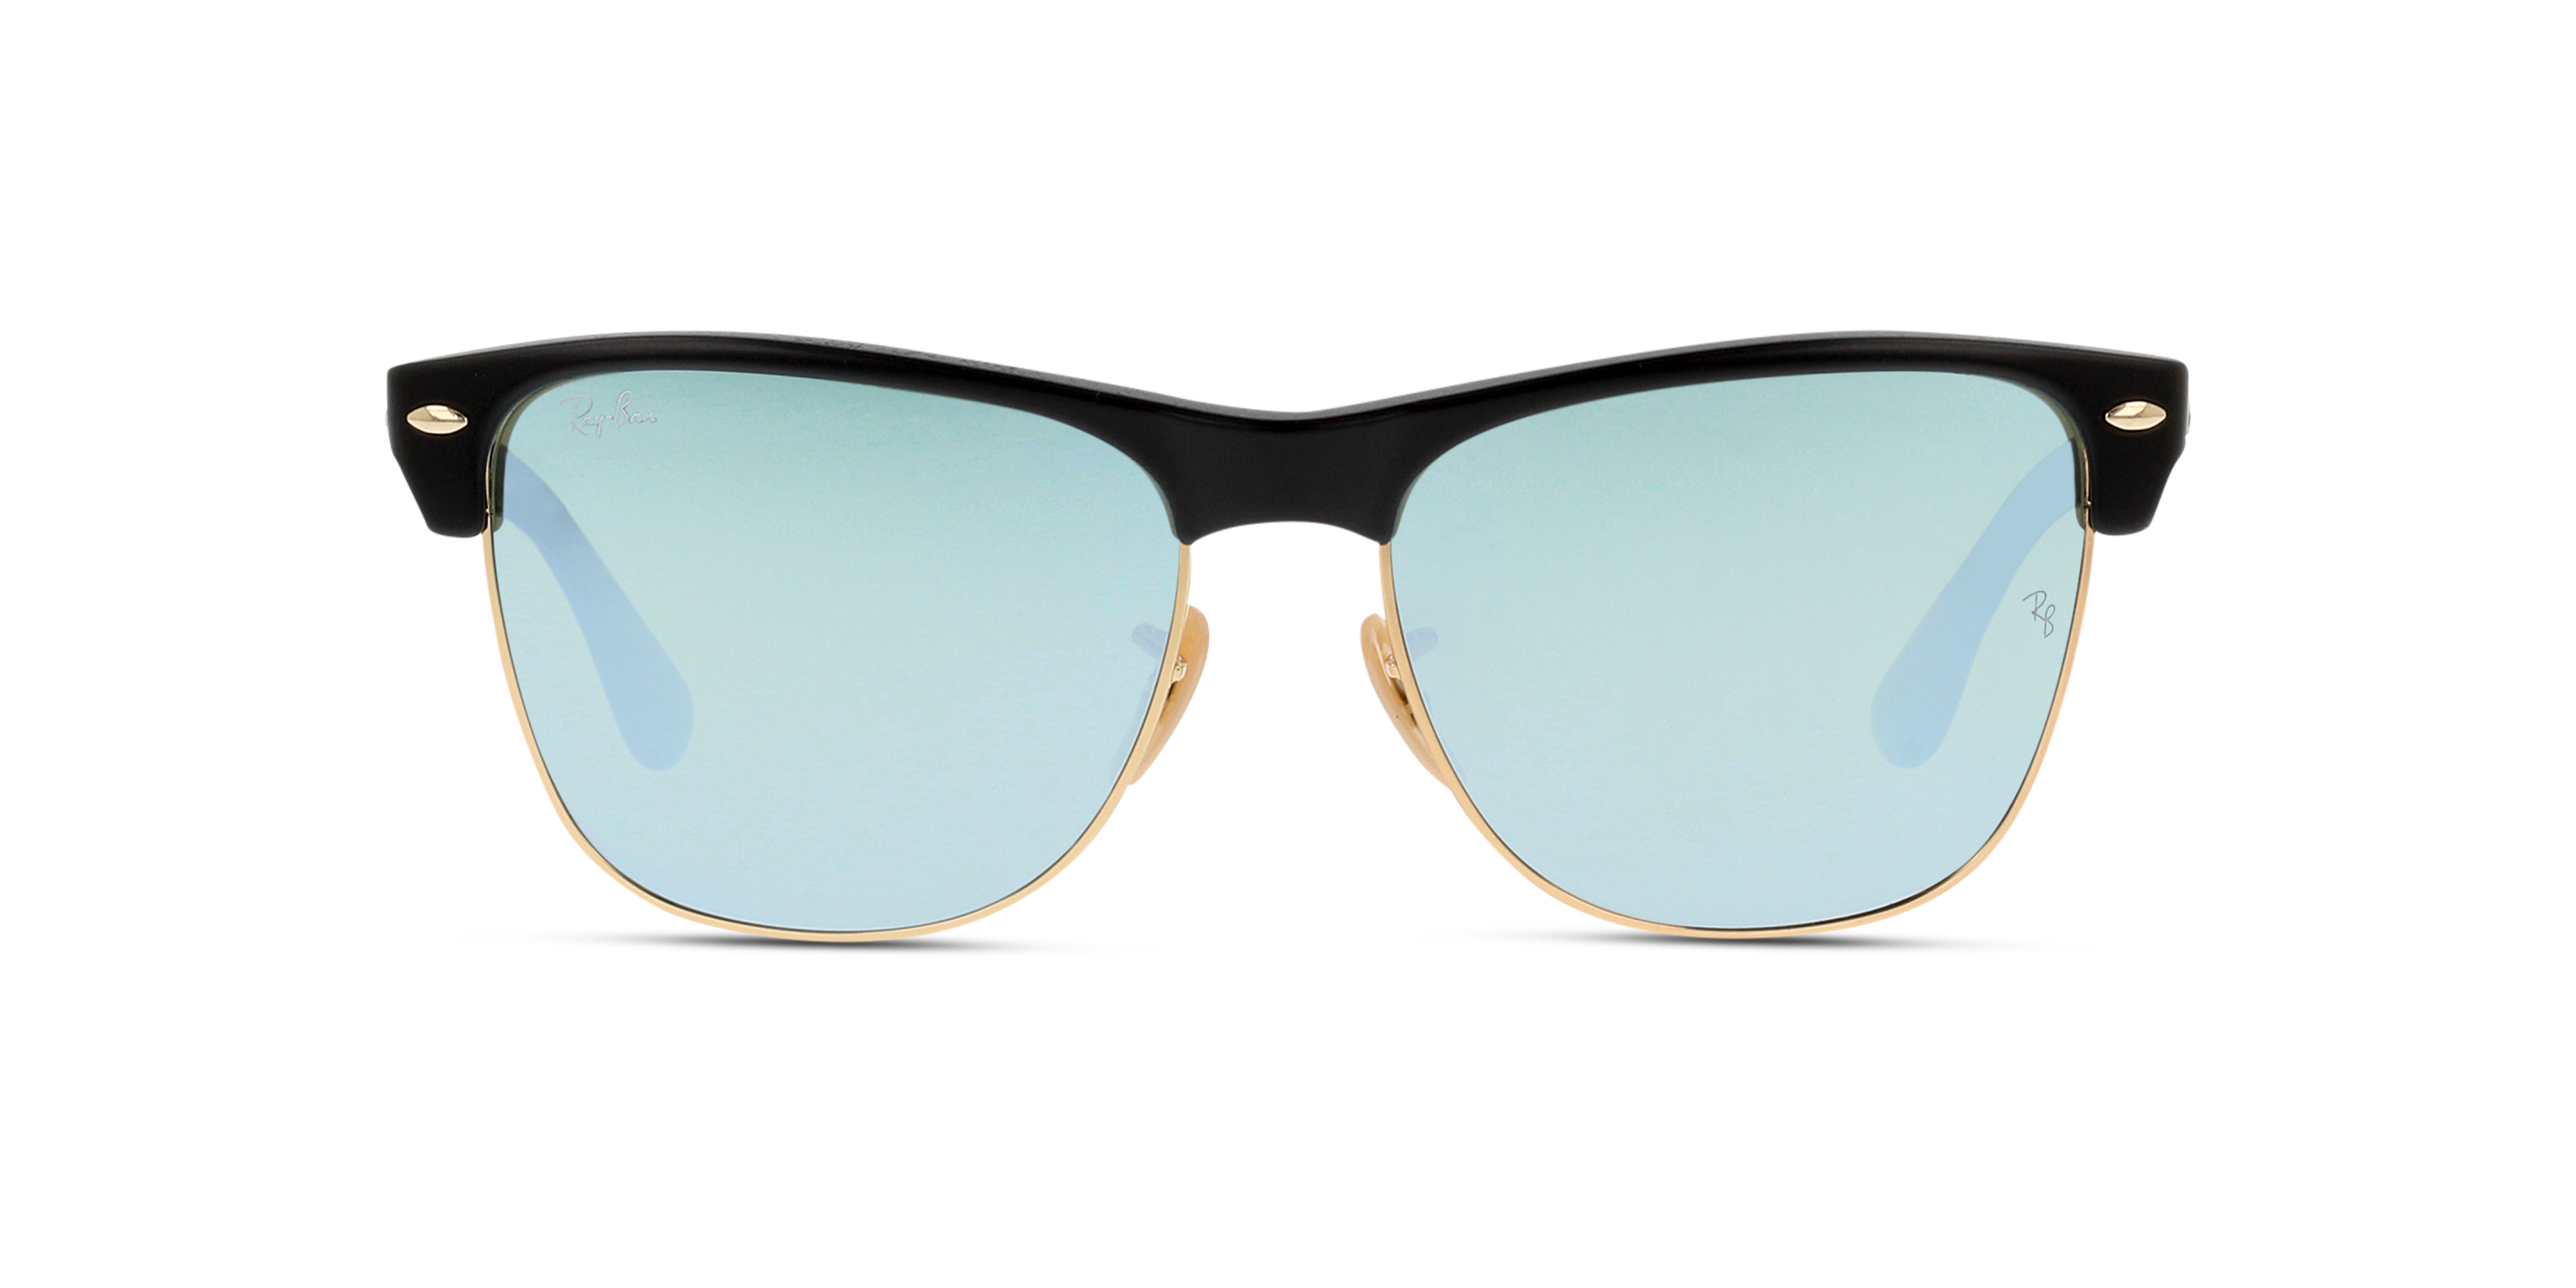 [products.image.front] Ray-Ban Clubmaster Oversized RB4175 877/30